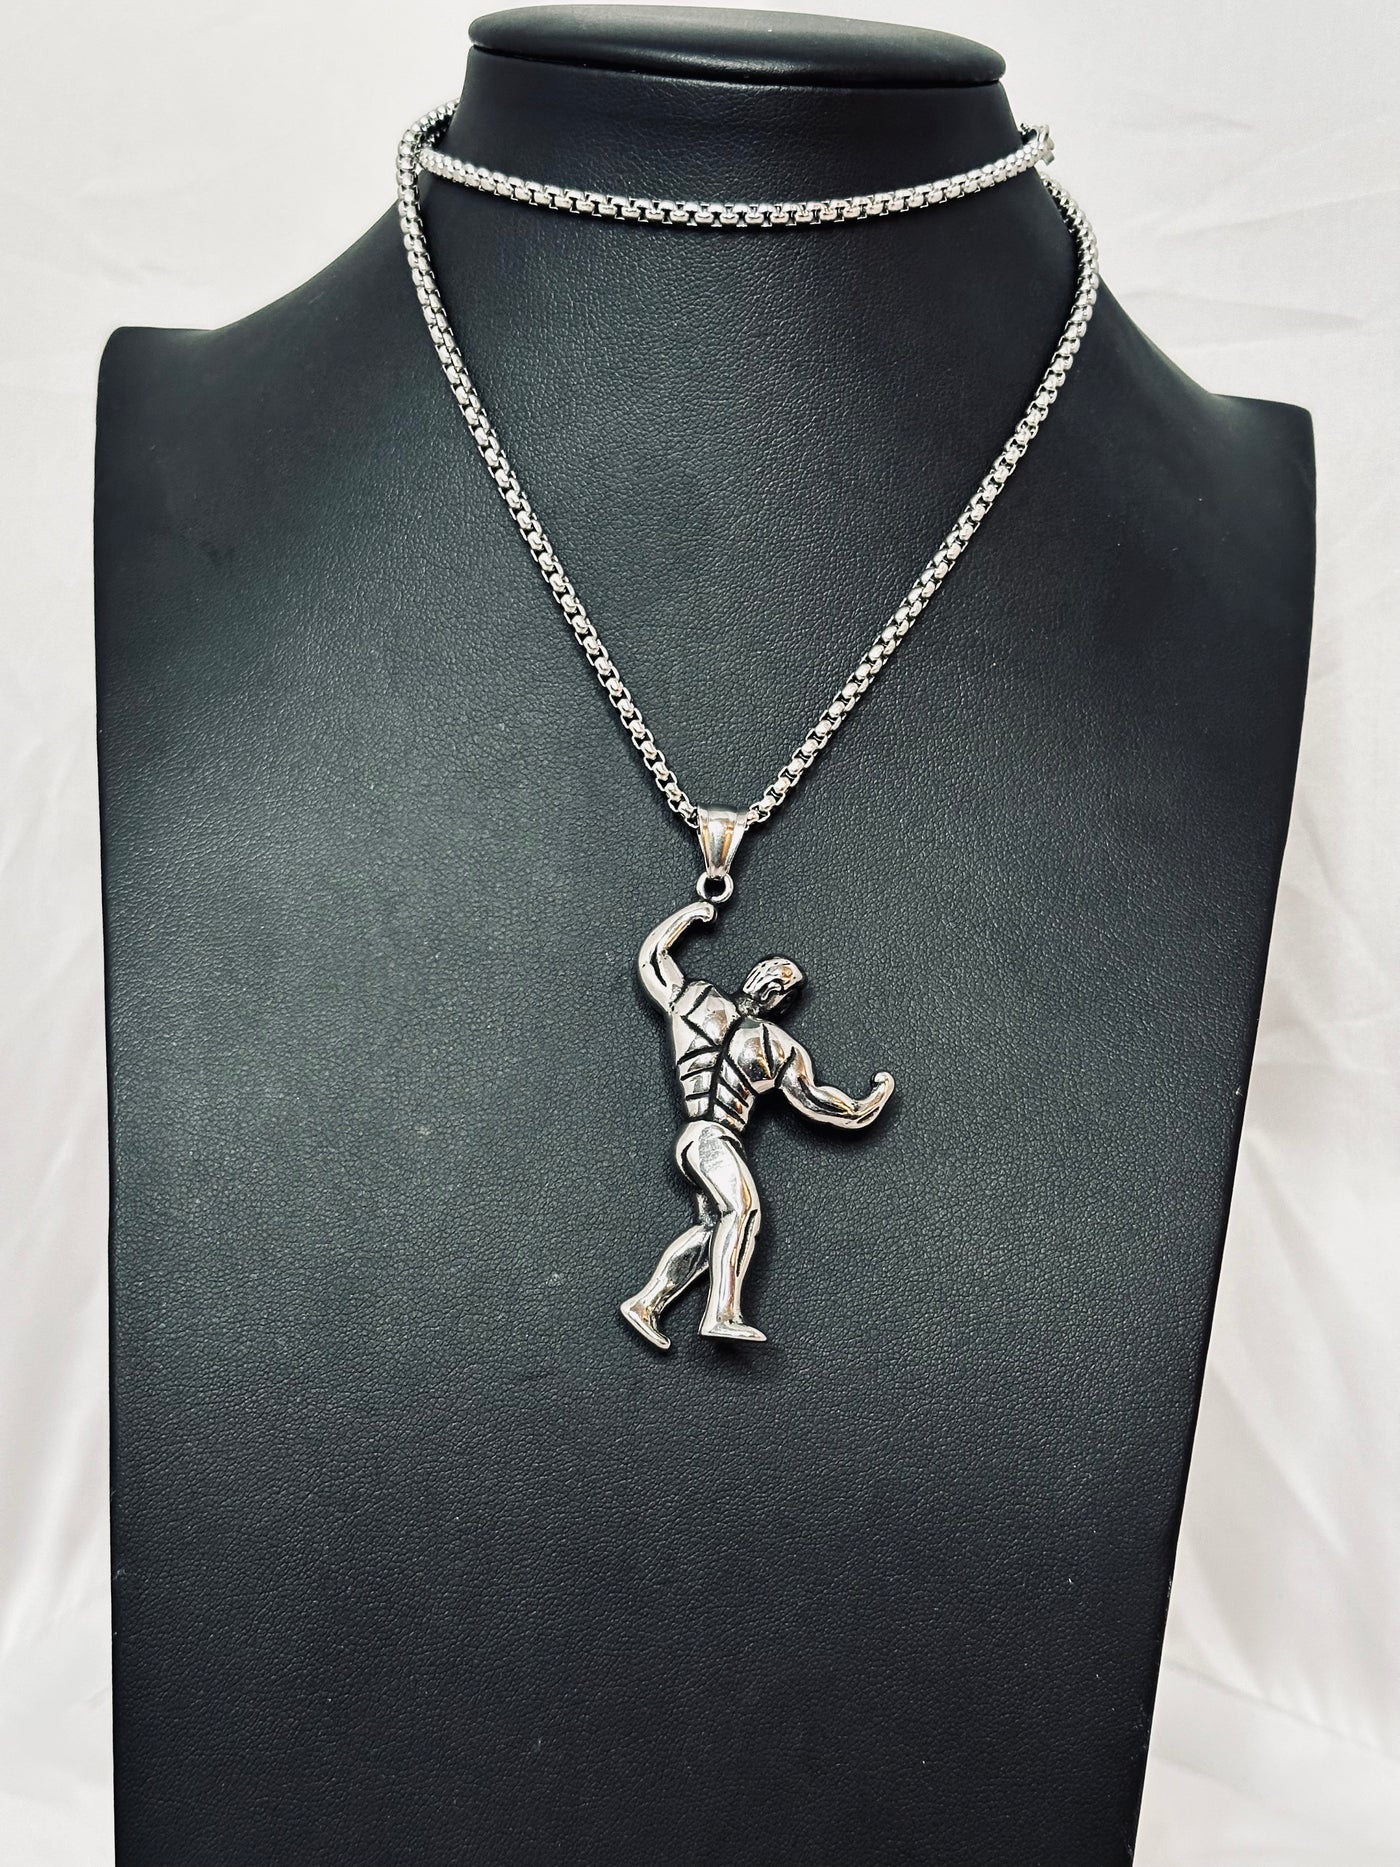 Muscle Man Posing Necklace